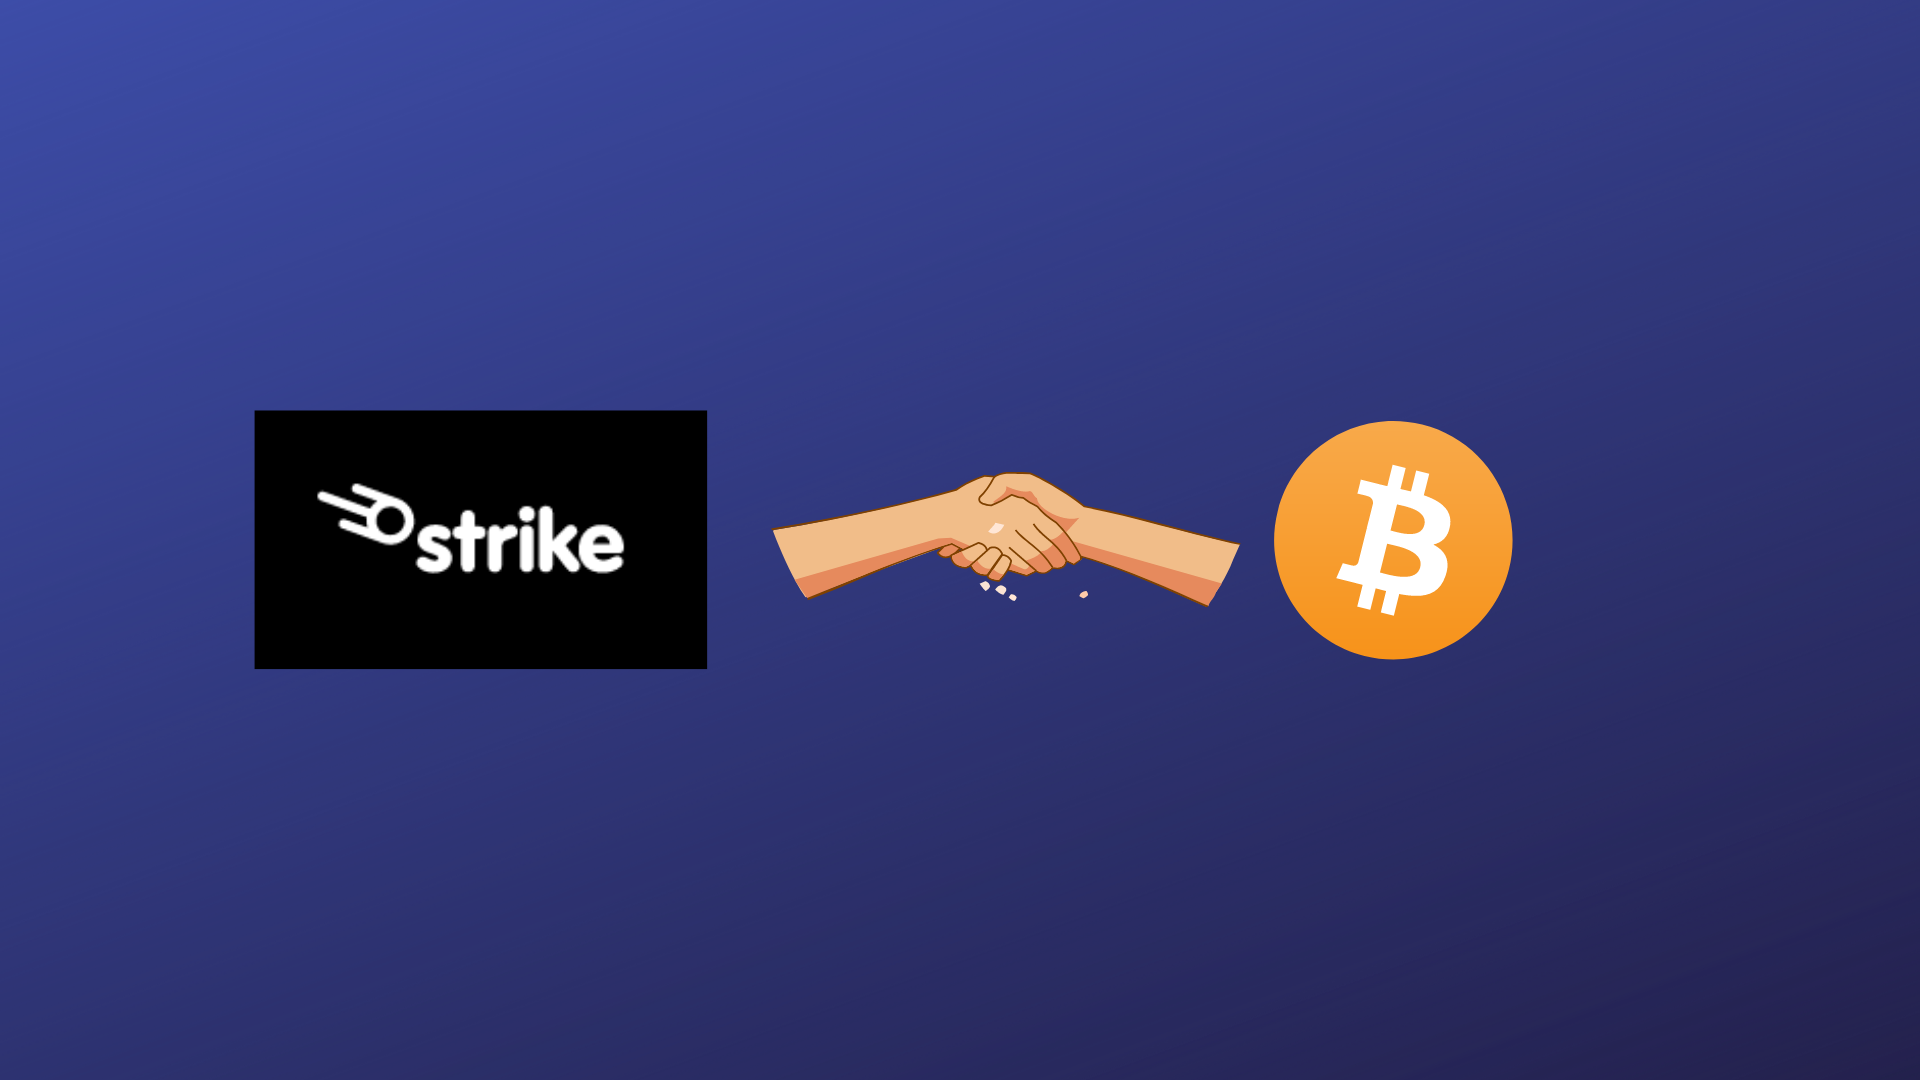 Strike to provide Bitcoin trading without any fees, taking ...